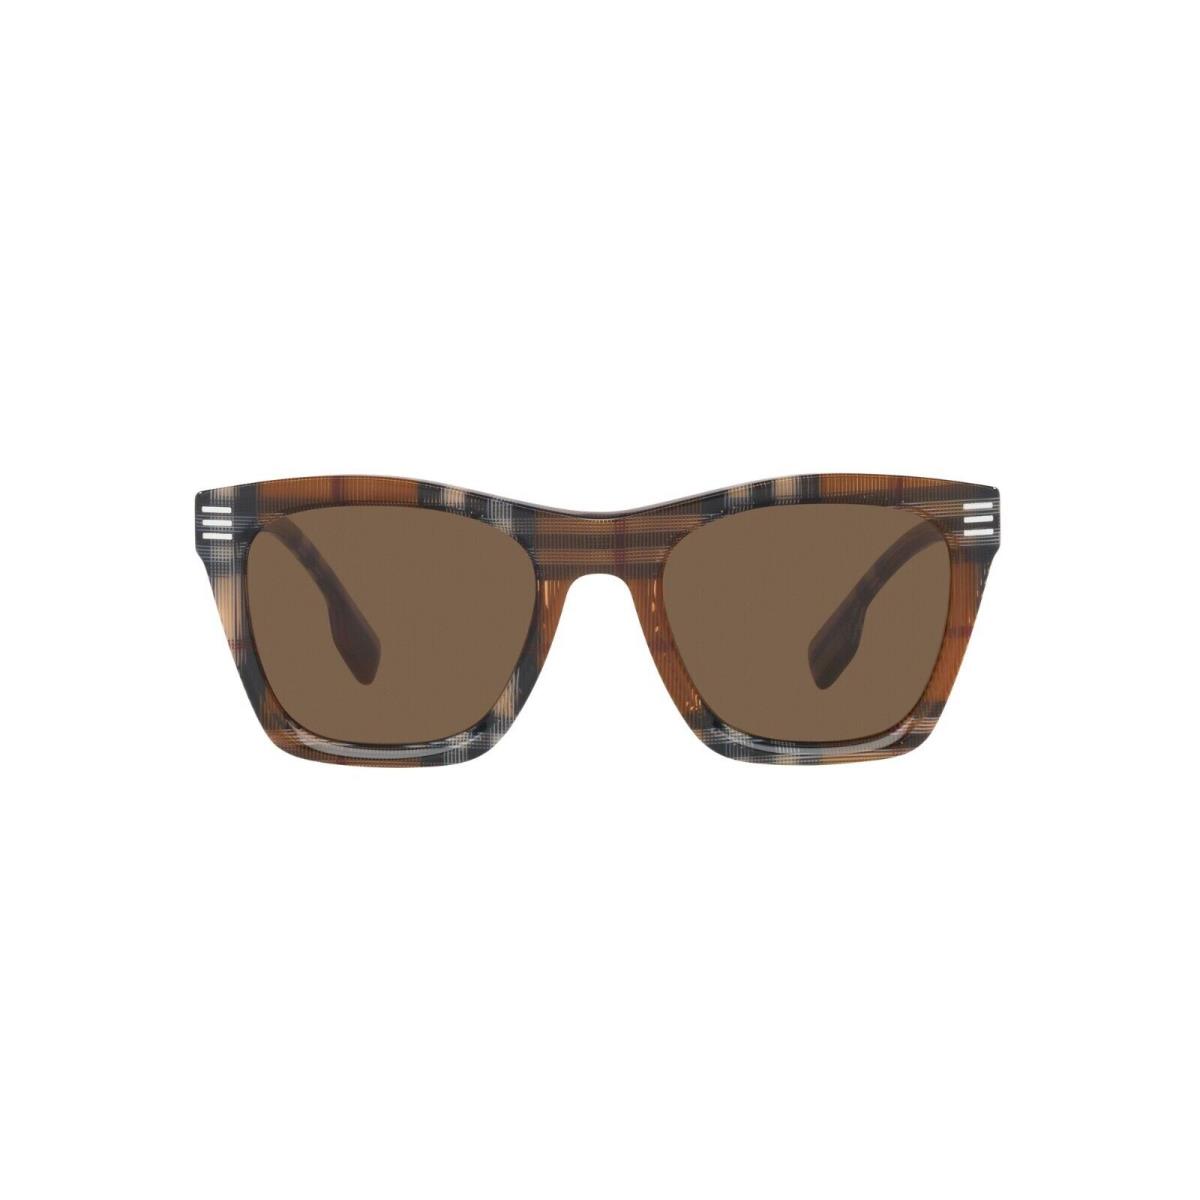 Burberry Cooper BE 4348 Striped Brown Check/brown 3966/73 Sunglasses - Frame: Striped Brown Check, Lens: Brown